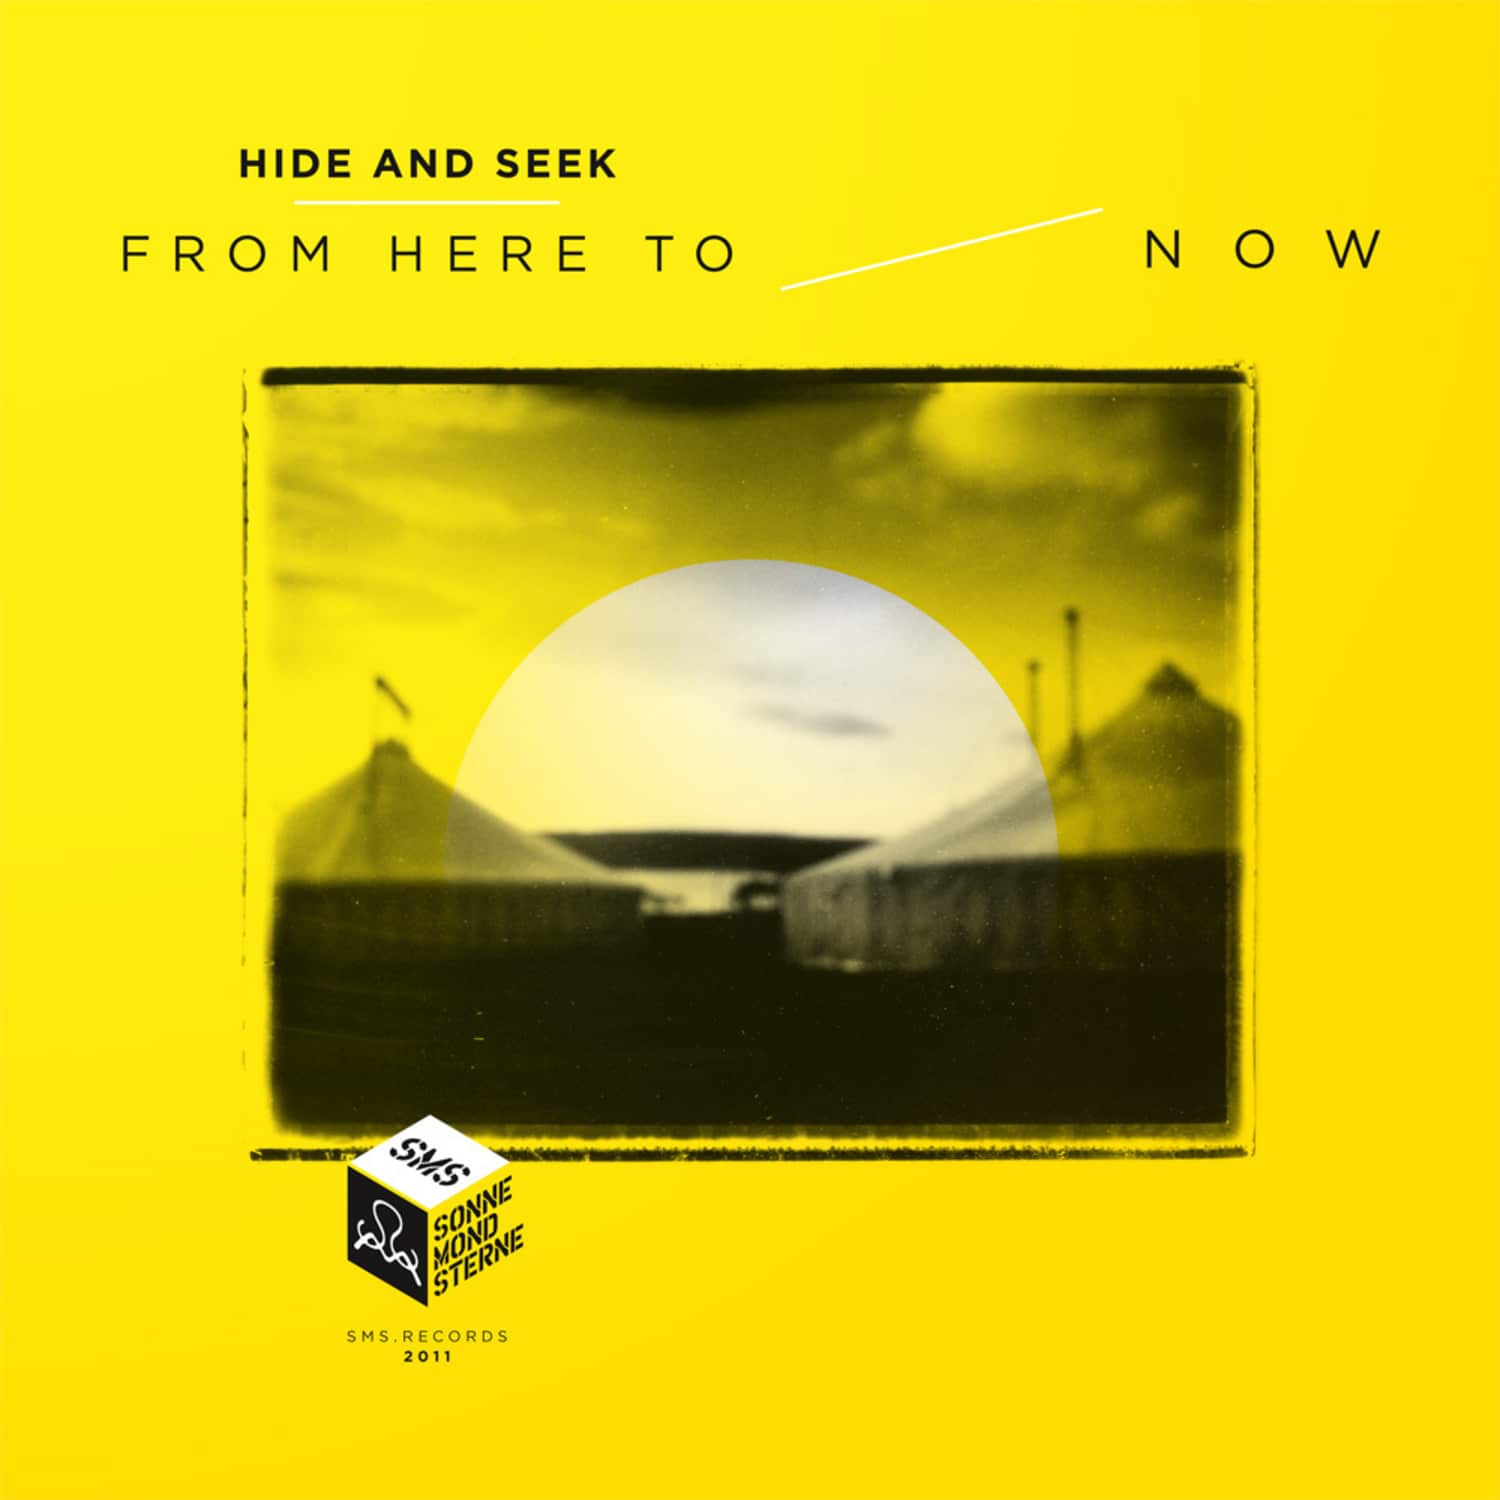 Hide And Seek - FROM HERE TO NOW